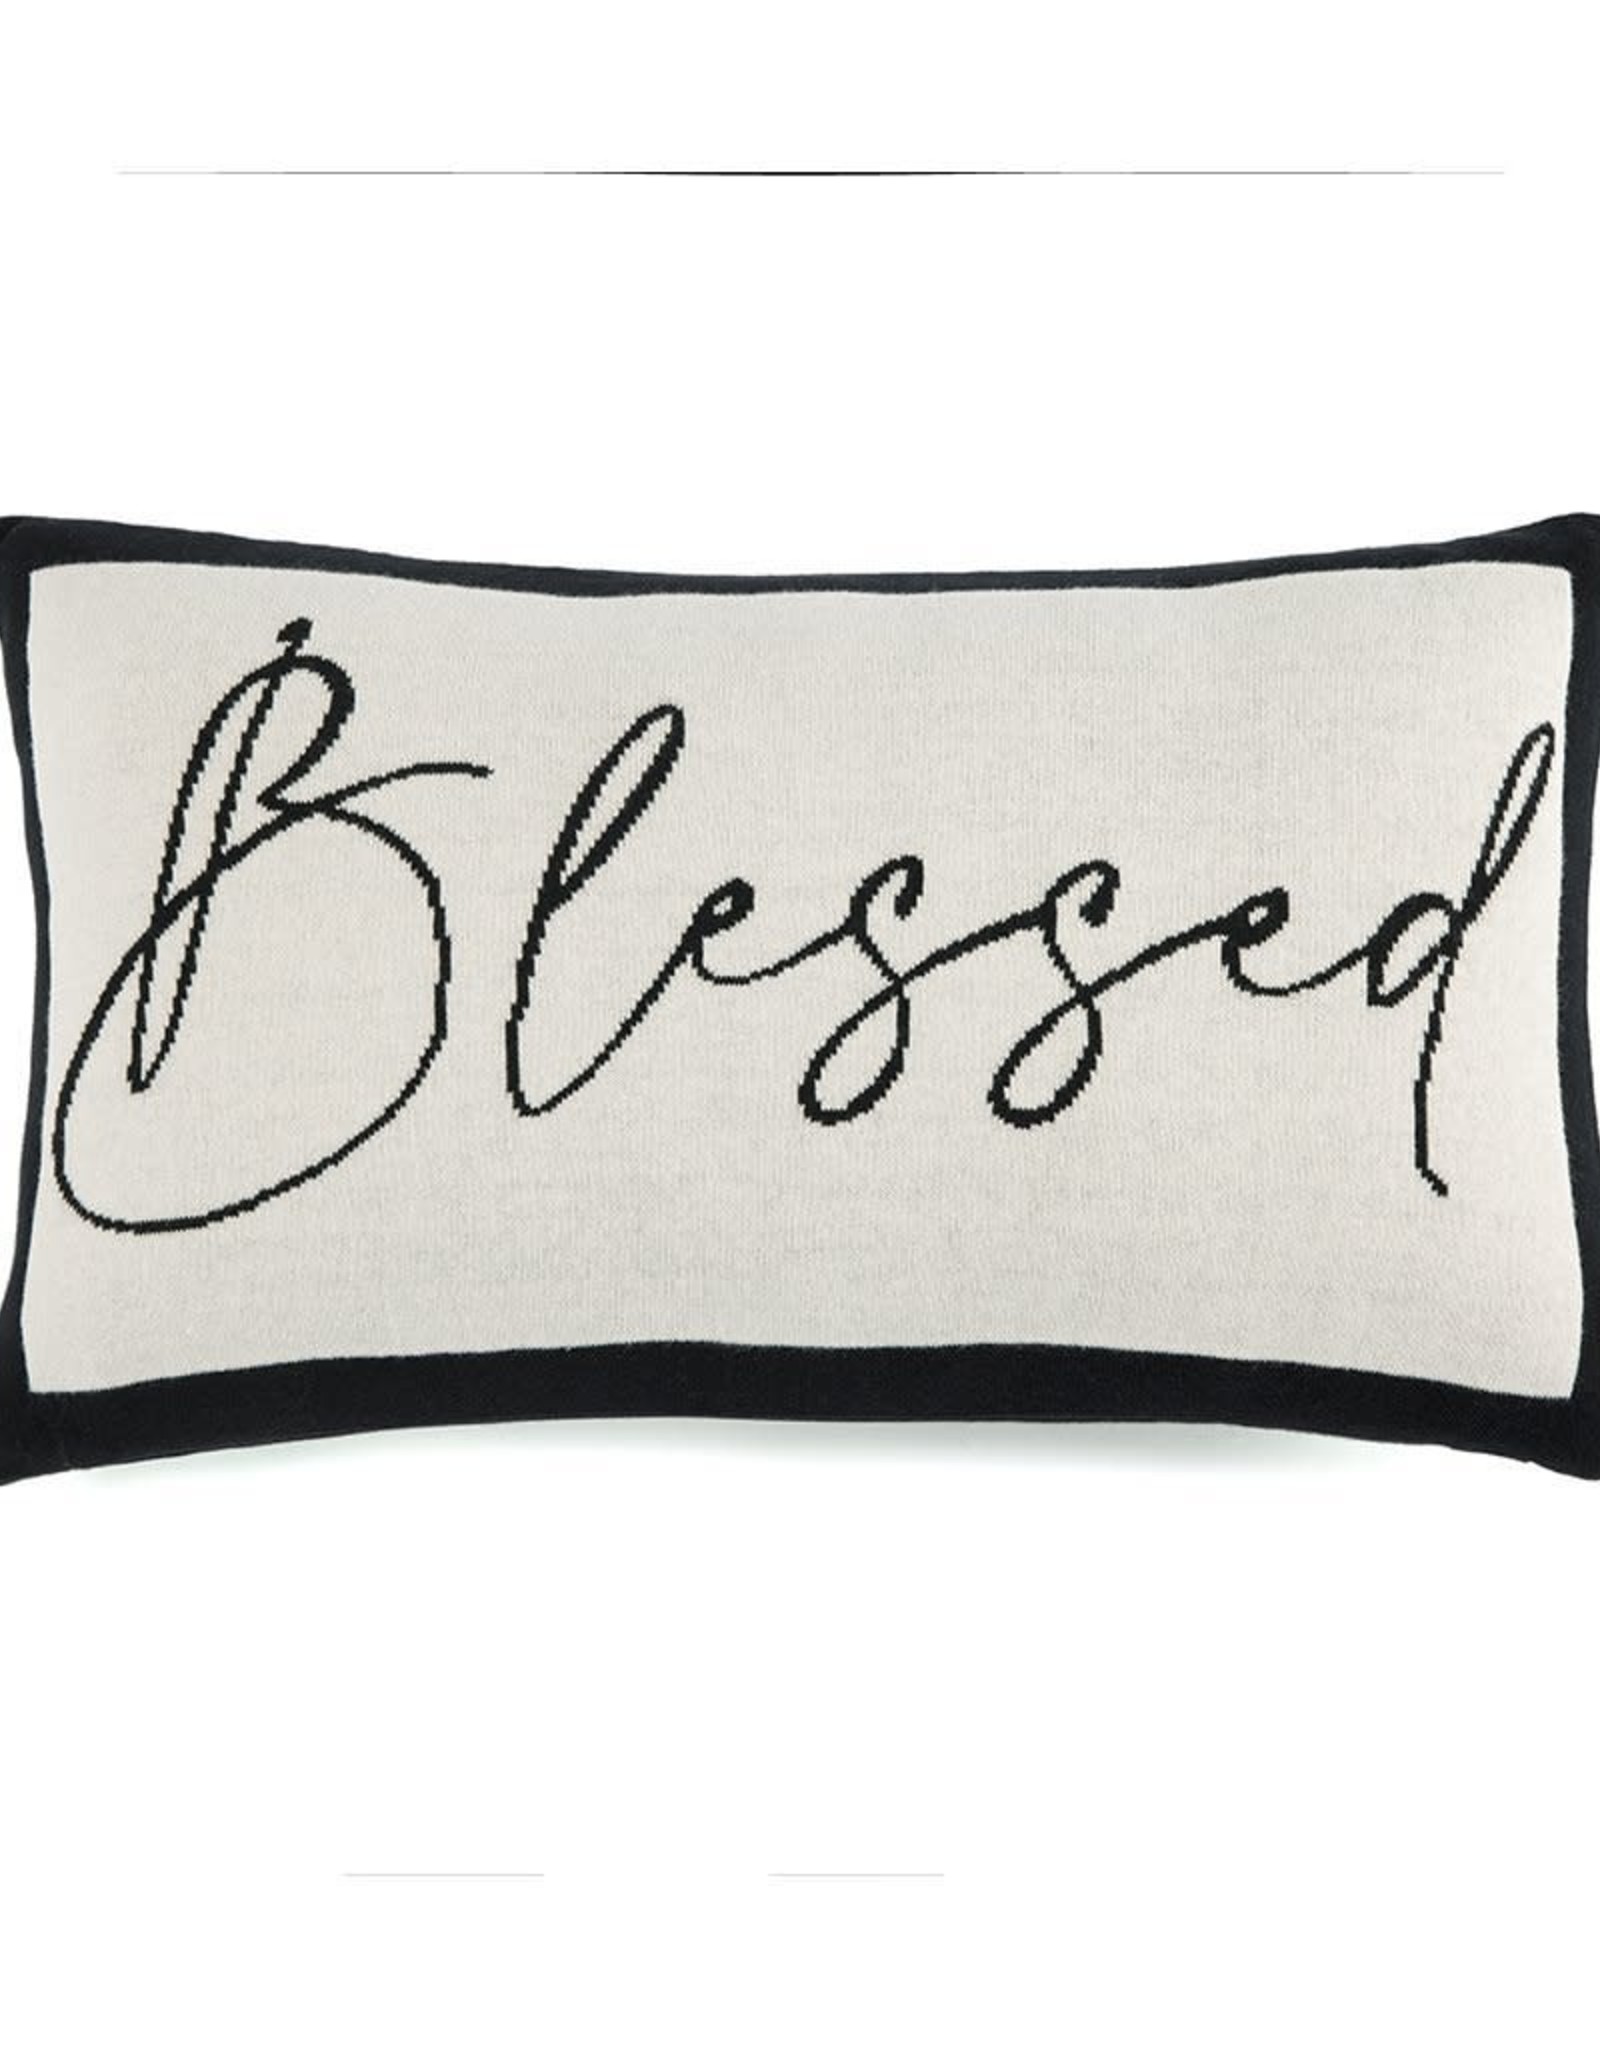 Blessed Throw Pillow